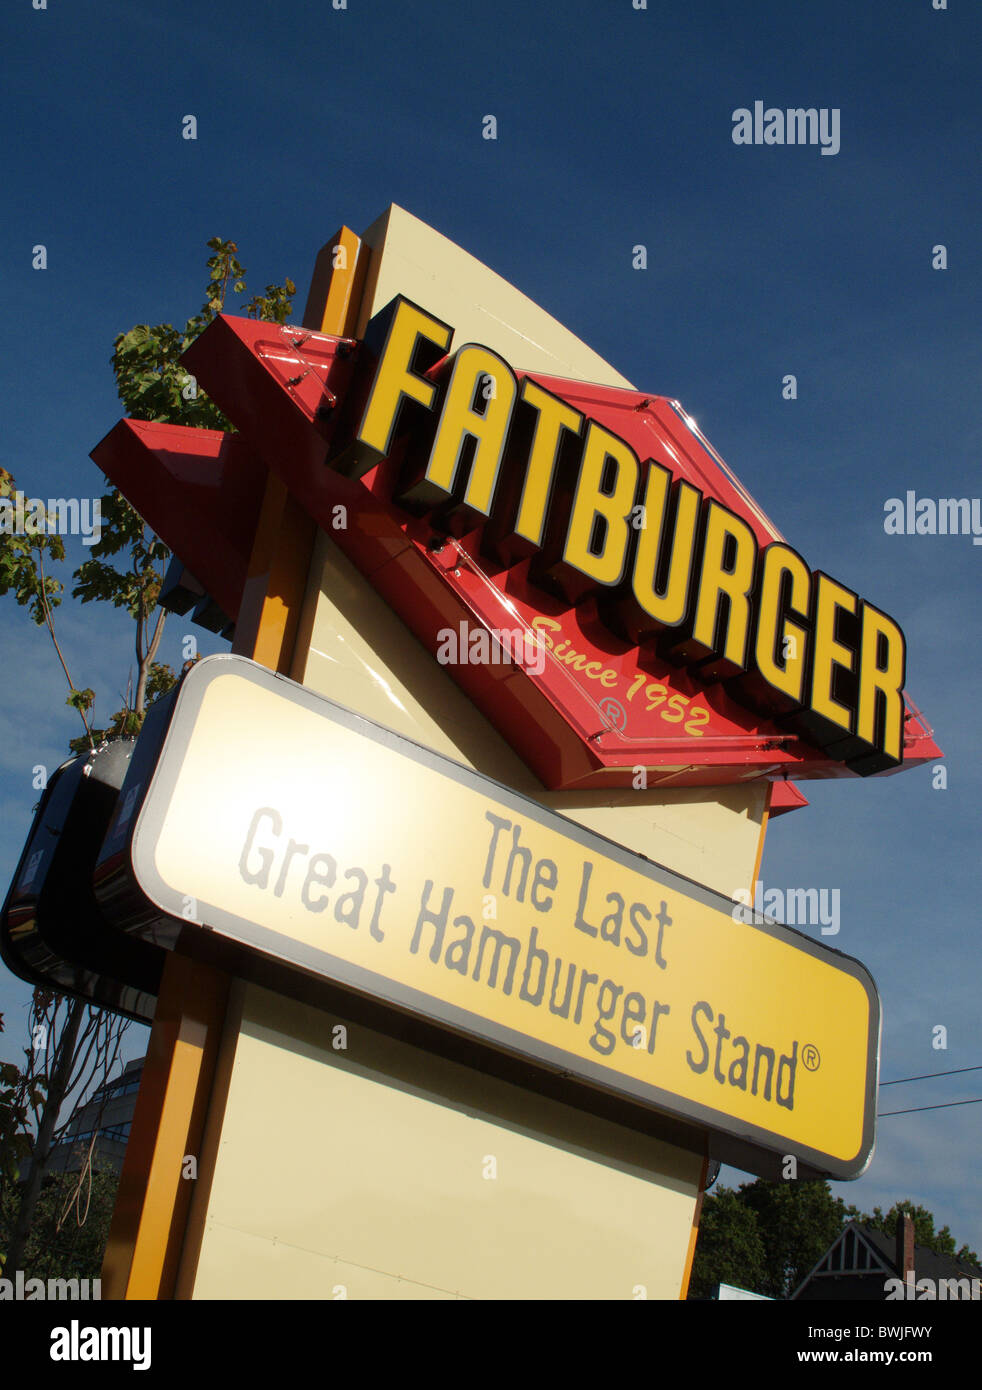 A Fatburger fast food restaurant in Vancouver, British Columbia, Canada Stock Photo